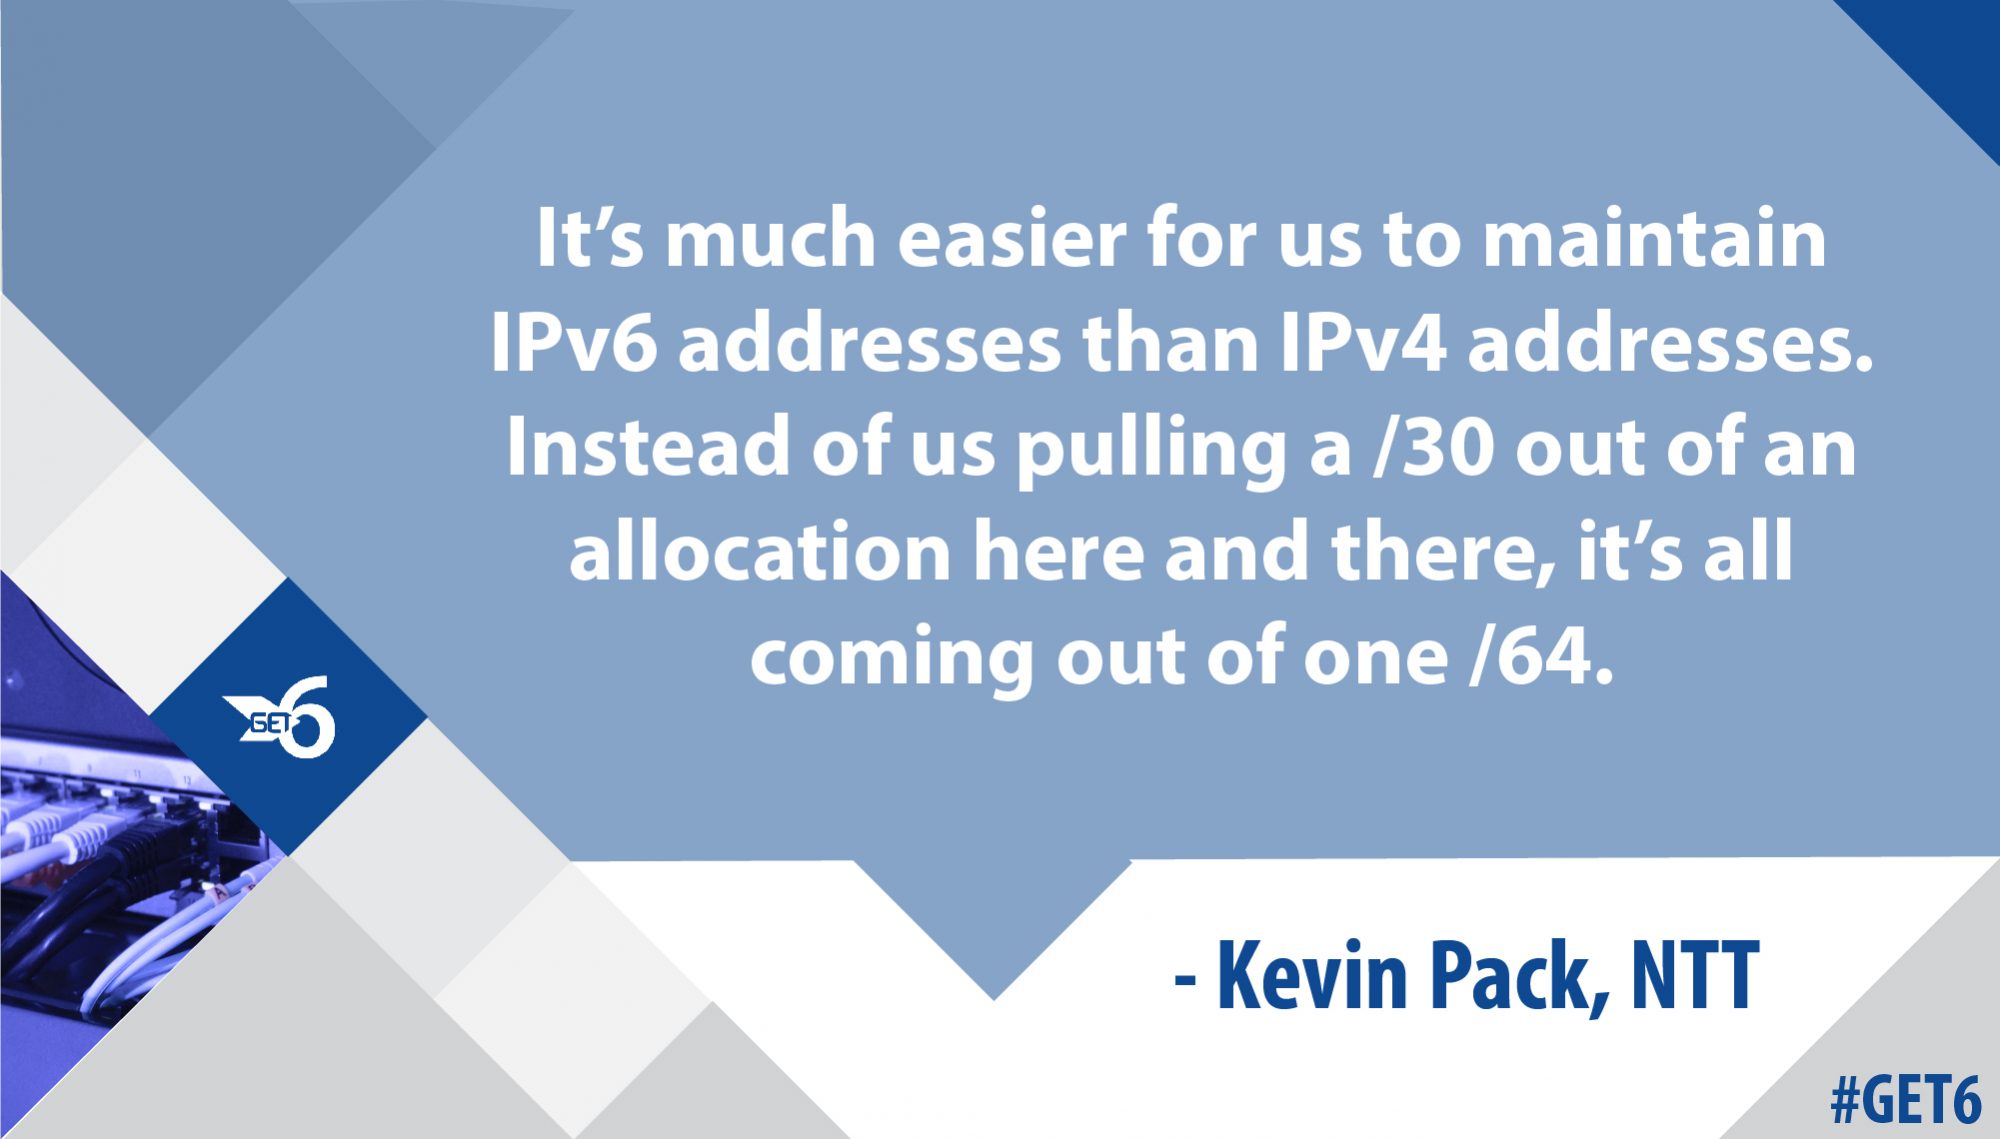 “It’s much easier for us to maintain IPv6 addresses than IPv4 addresses. Instead of us pulling a /30 out of an allocation here and there, it’s all coming out of one /64.”